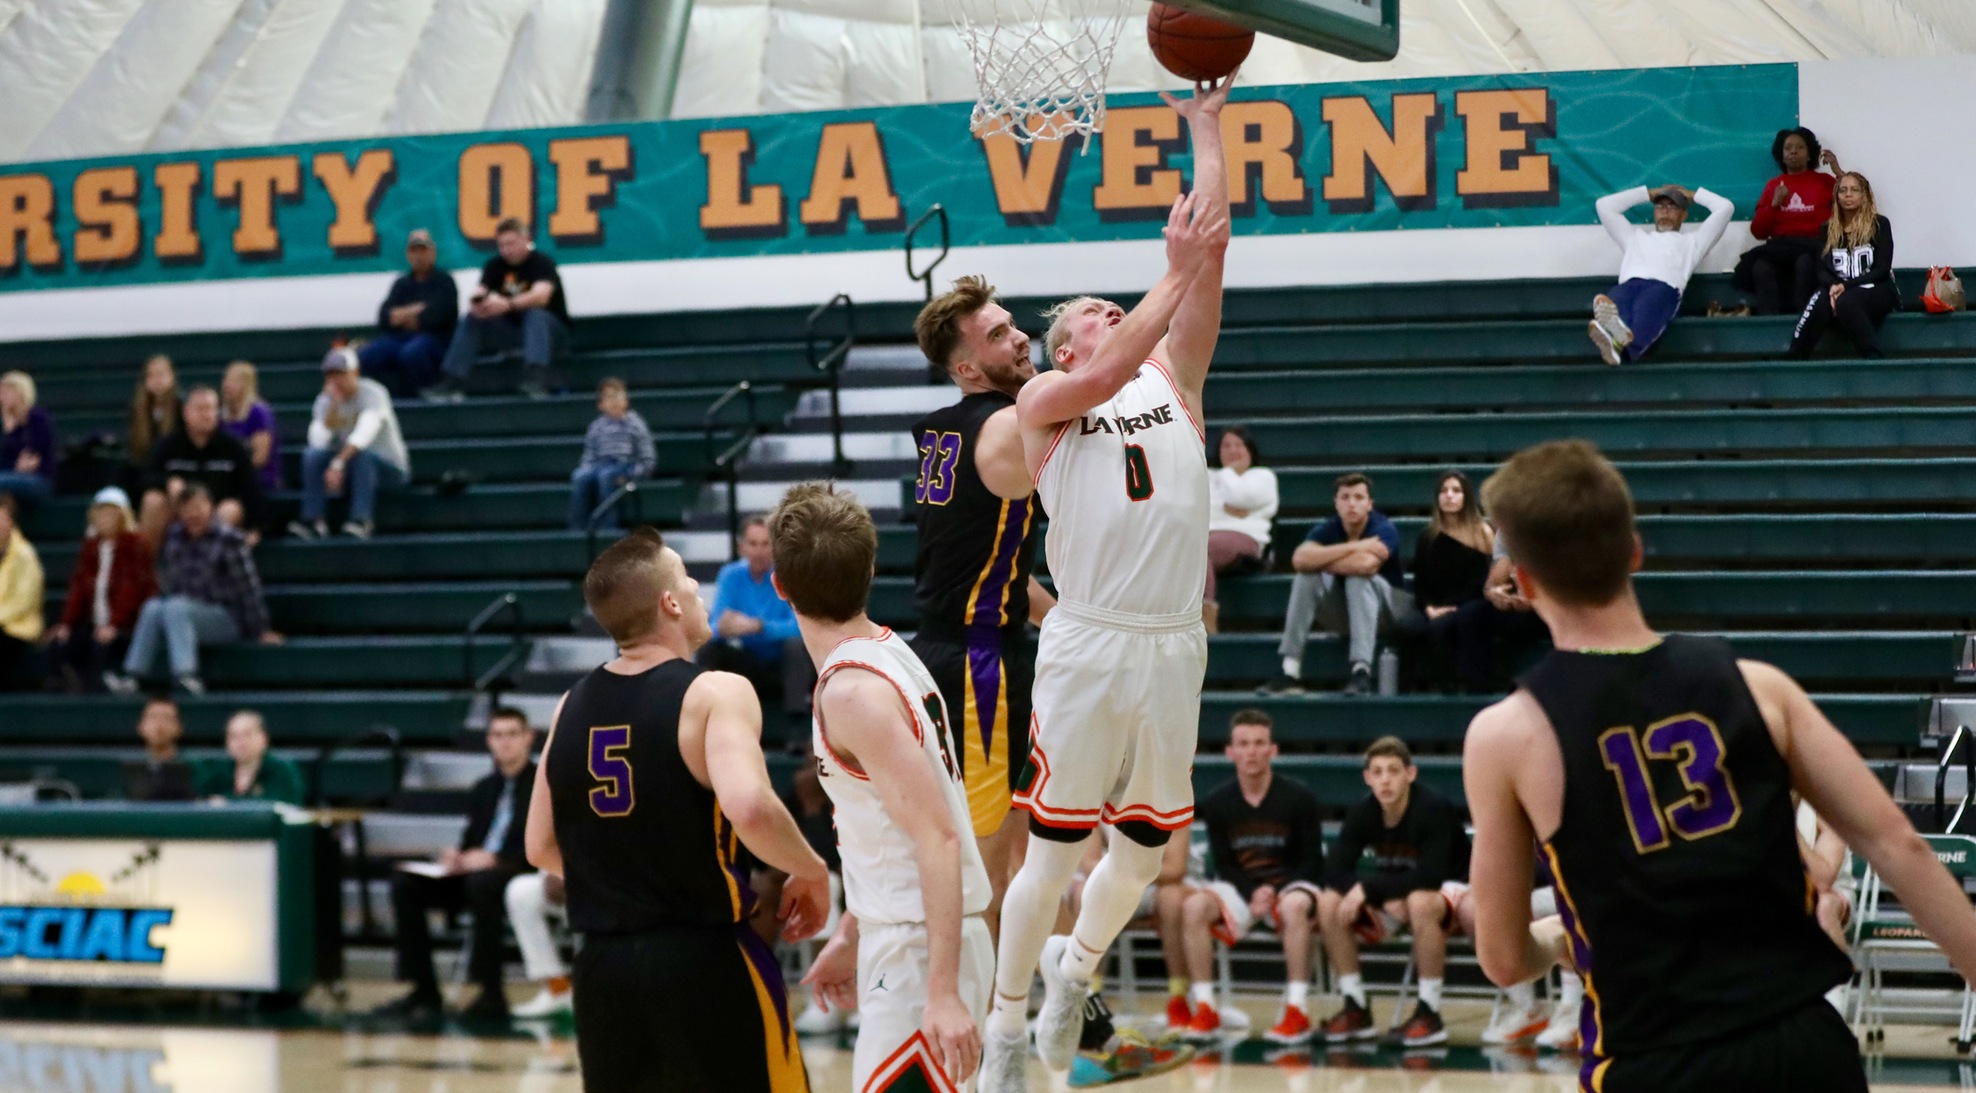 Men's Basketball nearly upsets first place Occidental